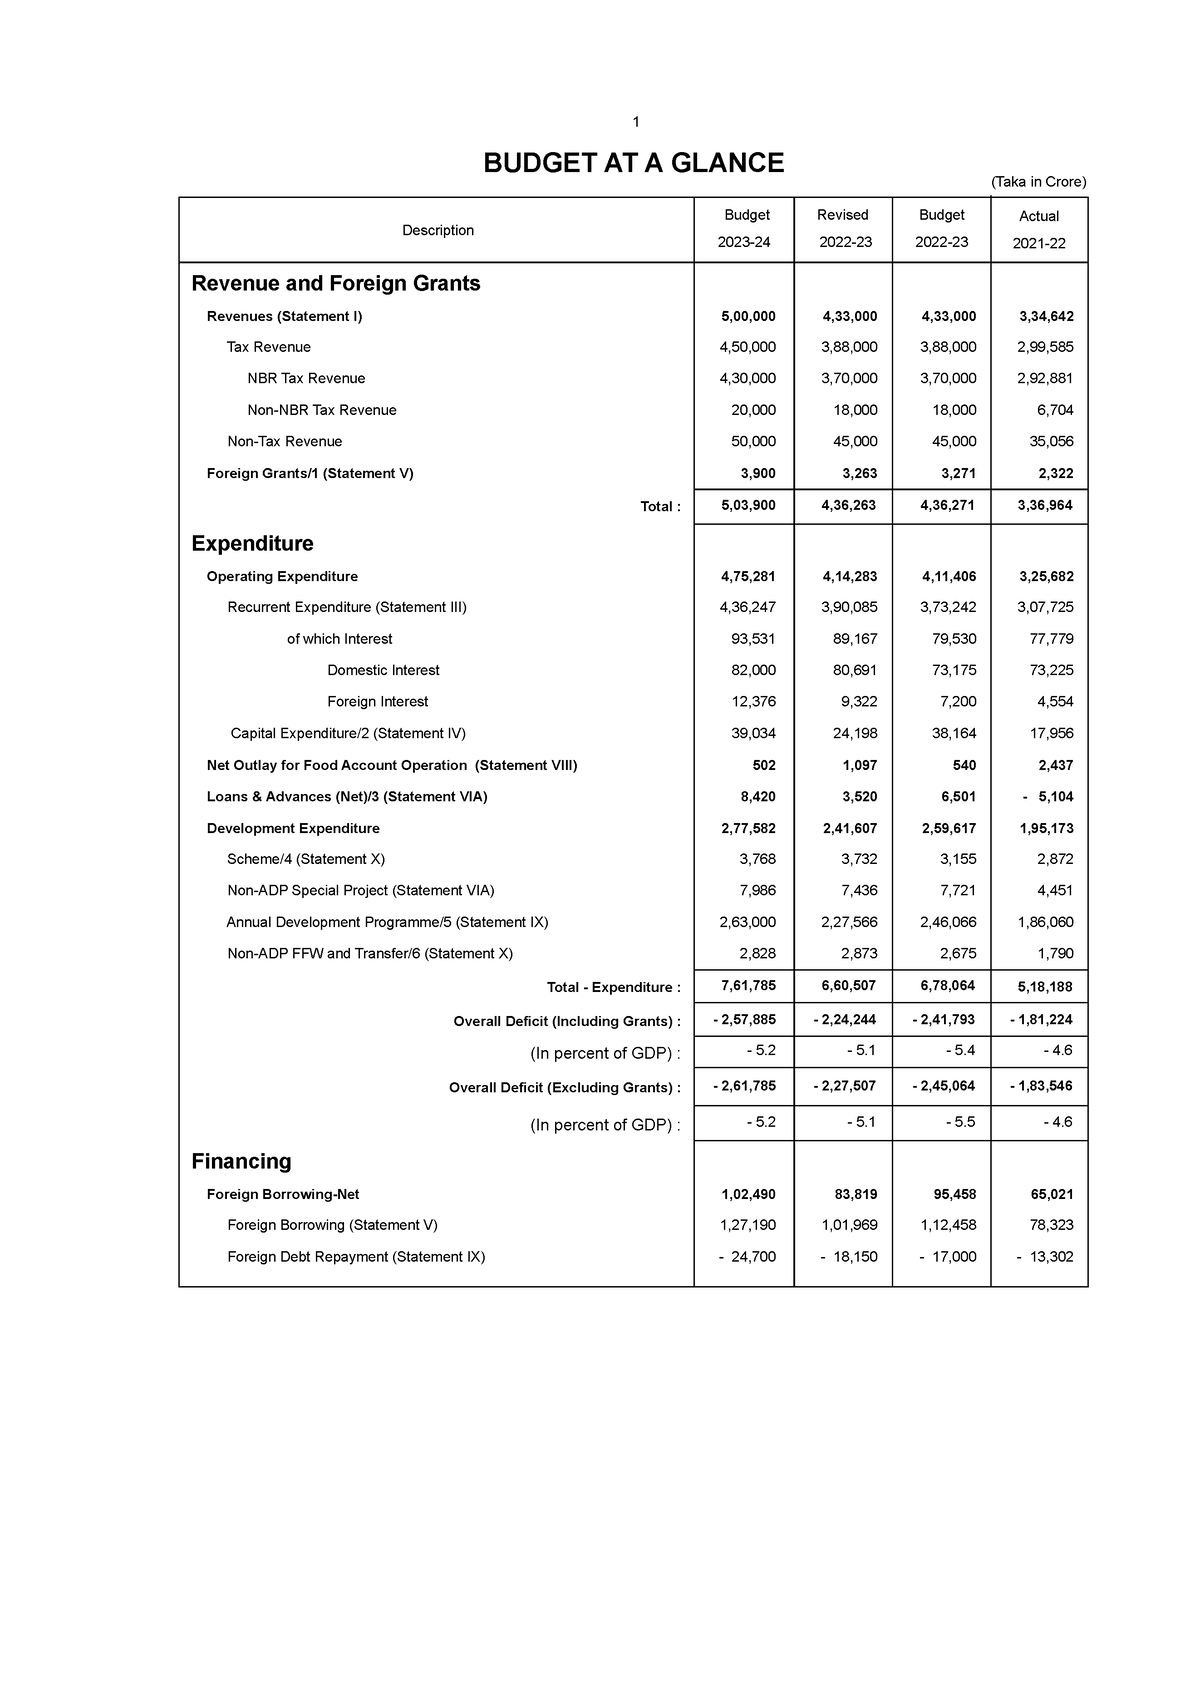 Budget Summary 20232024 BUDGET AT A GLANCE (Taka in Crore